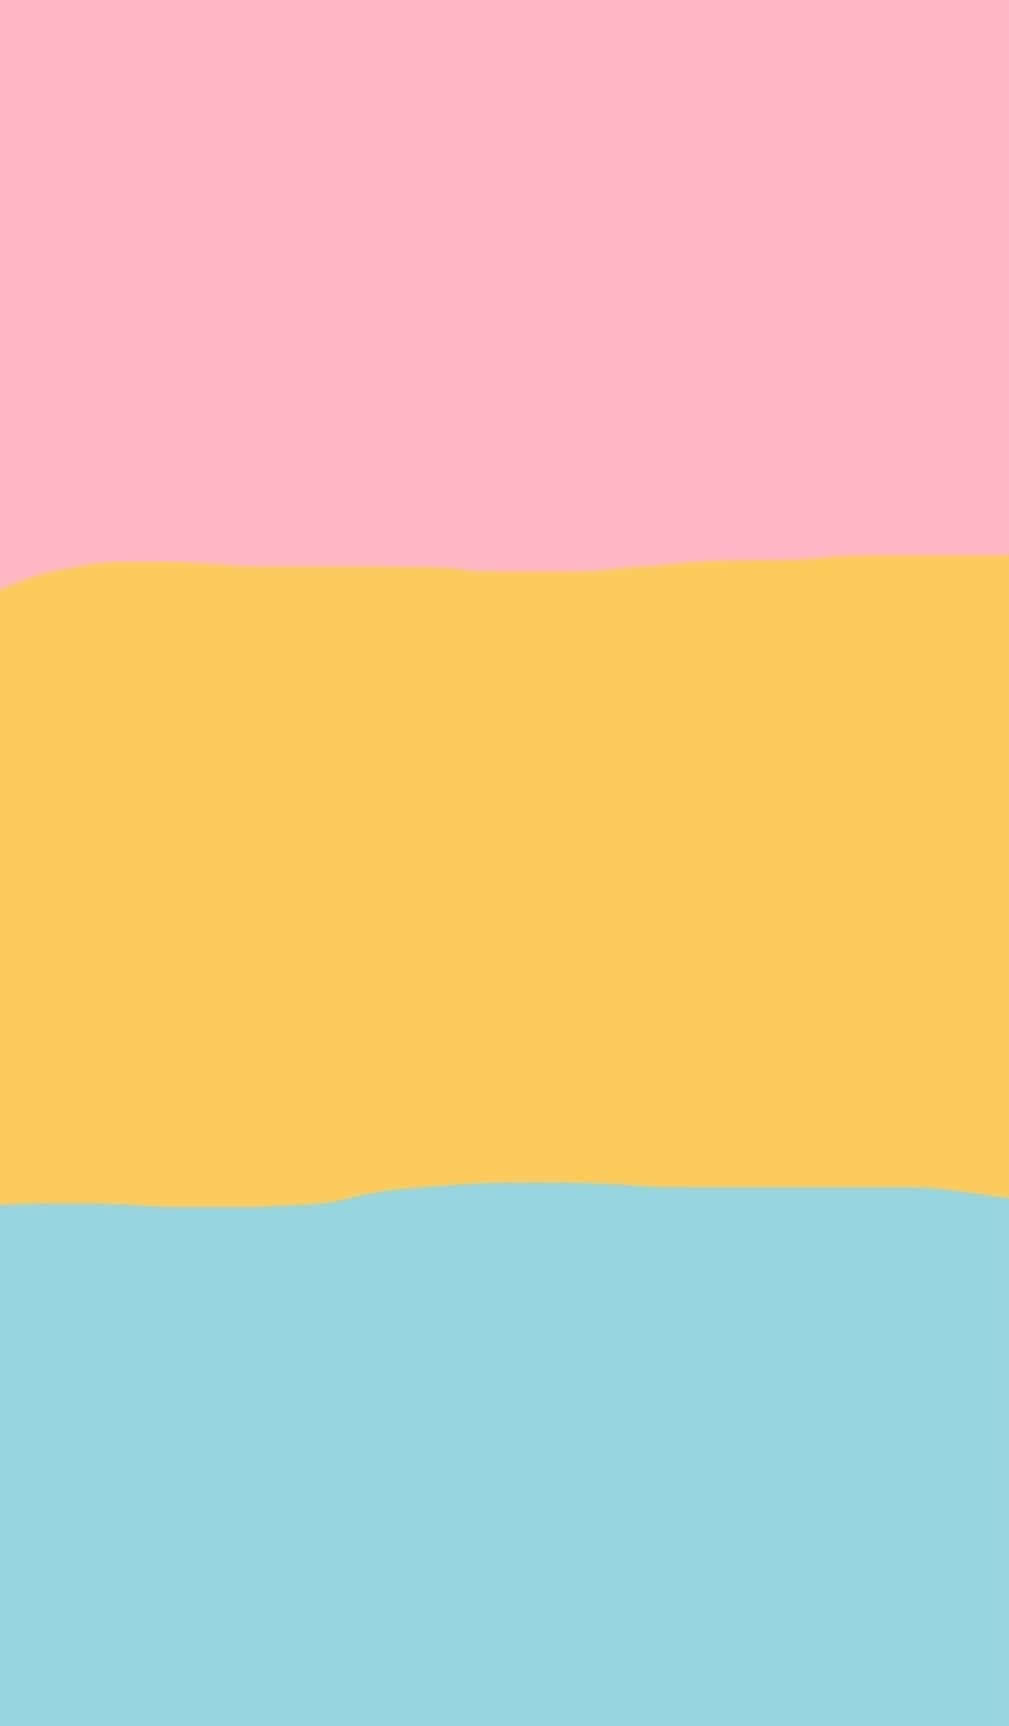 A Pink, Yellow, And Blue Flag With A Rainbow In The Middle Wallpaper